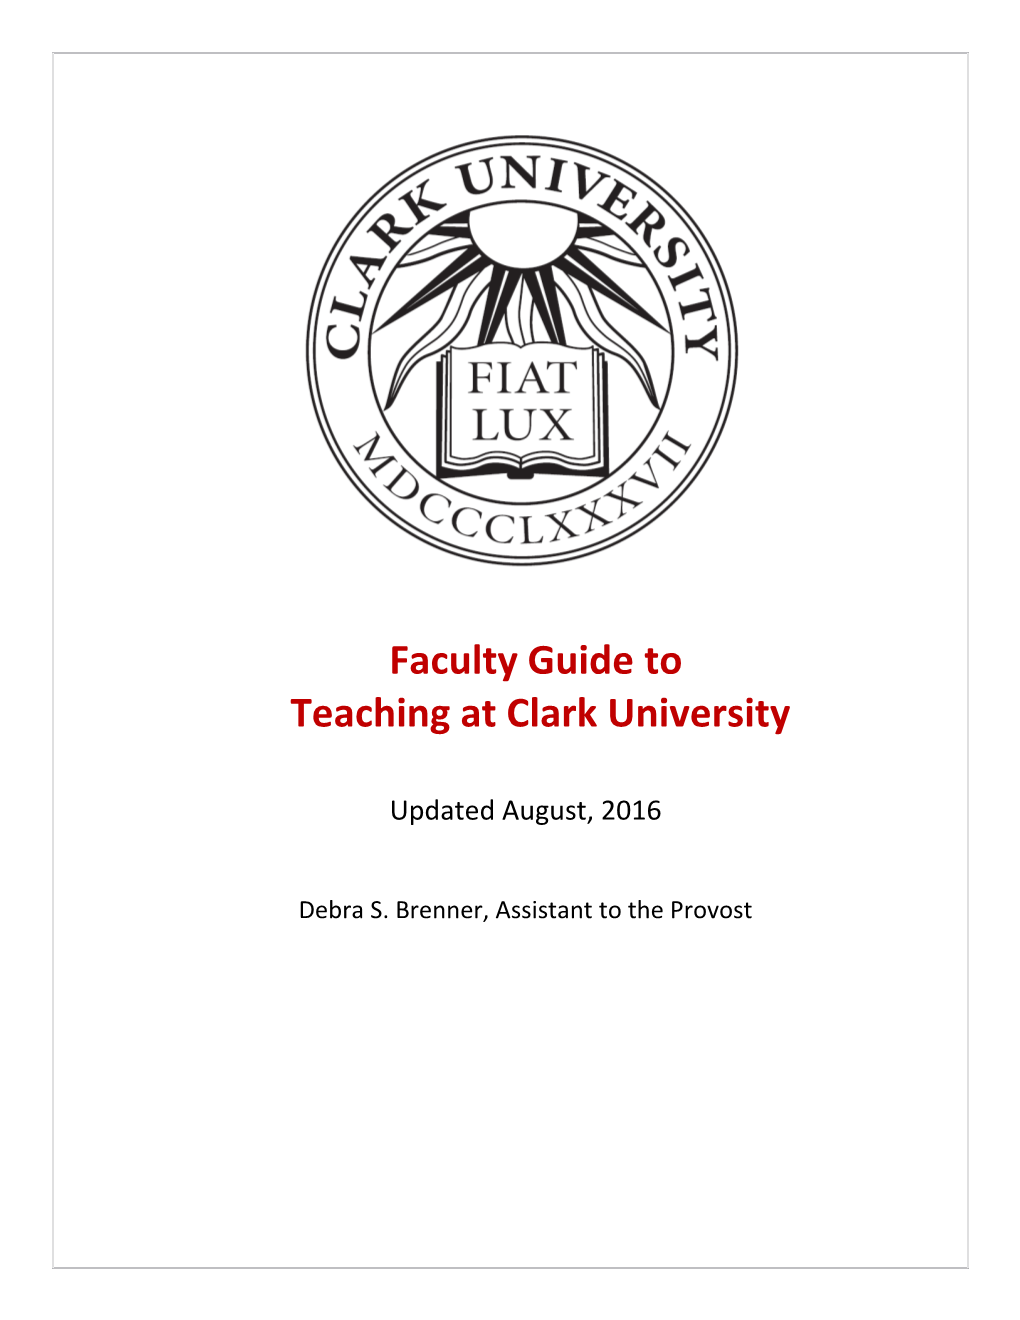 Faculty Guide to Teaching August 2016